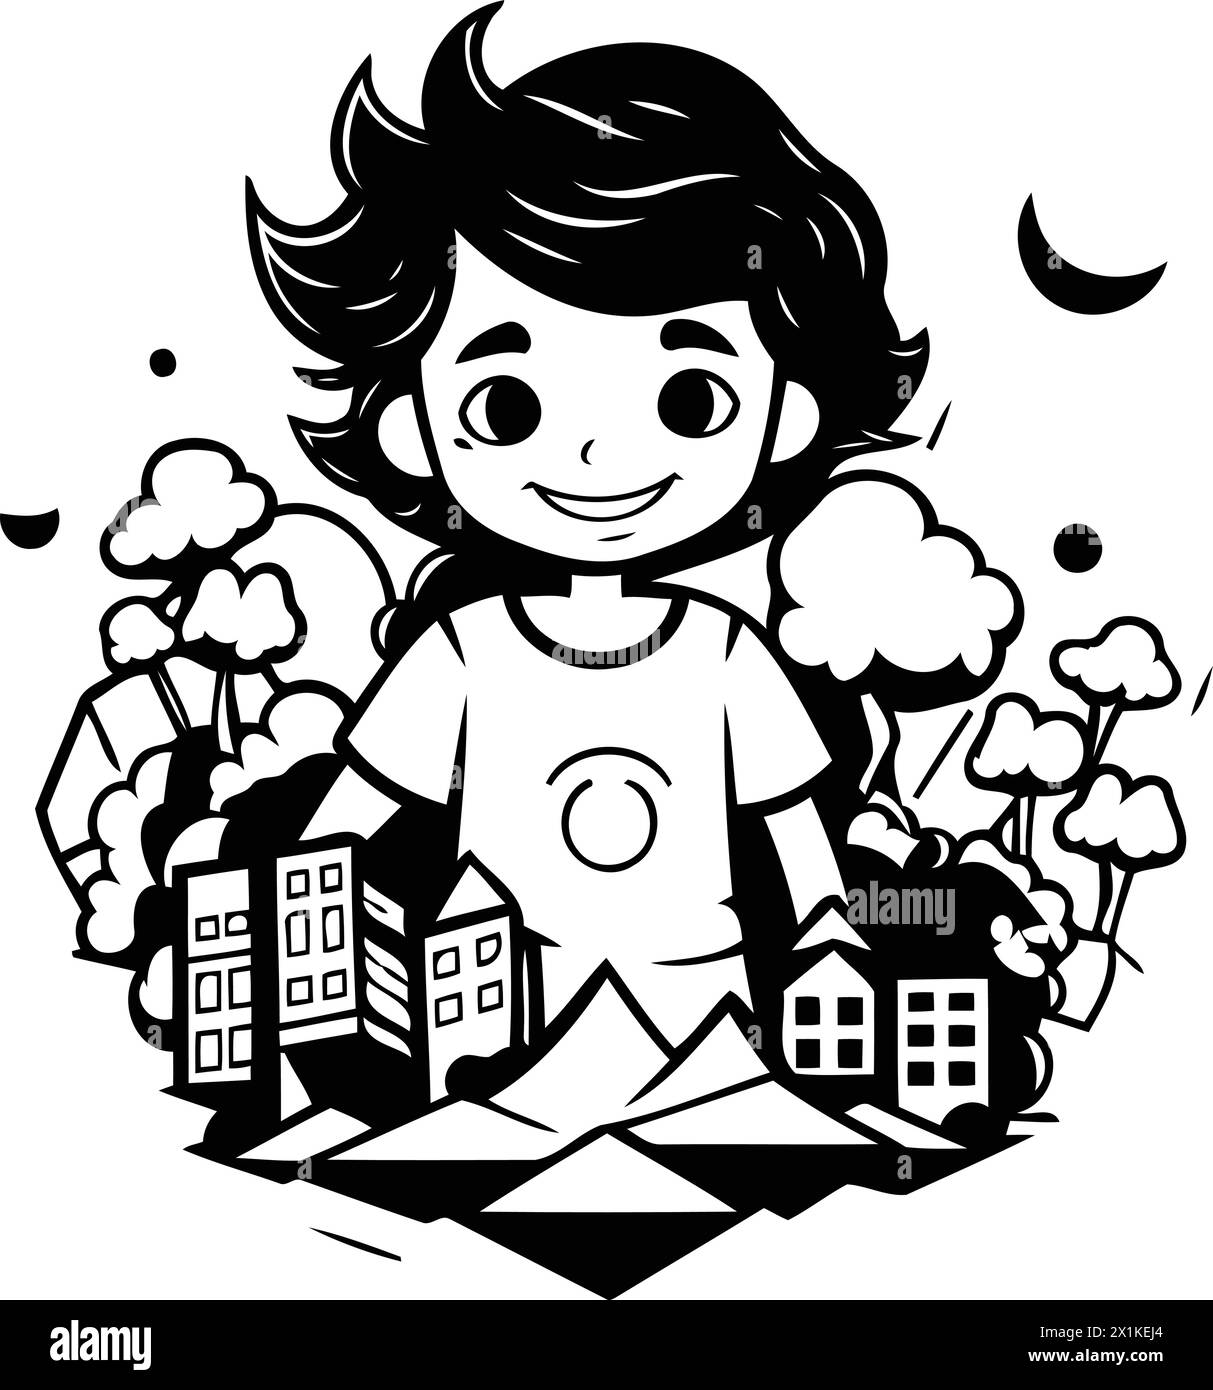 Vector illustration of a boy in a city park with buildings and trees. Stock Vector